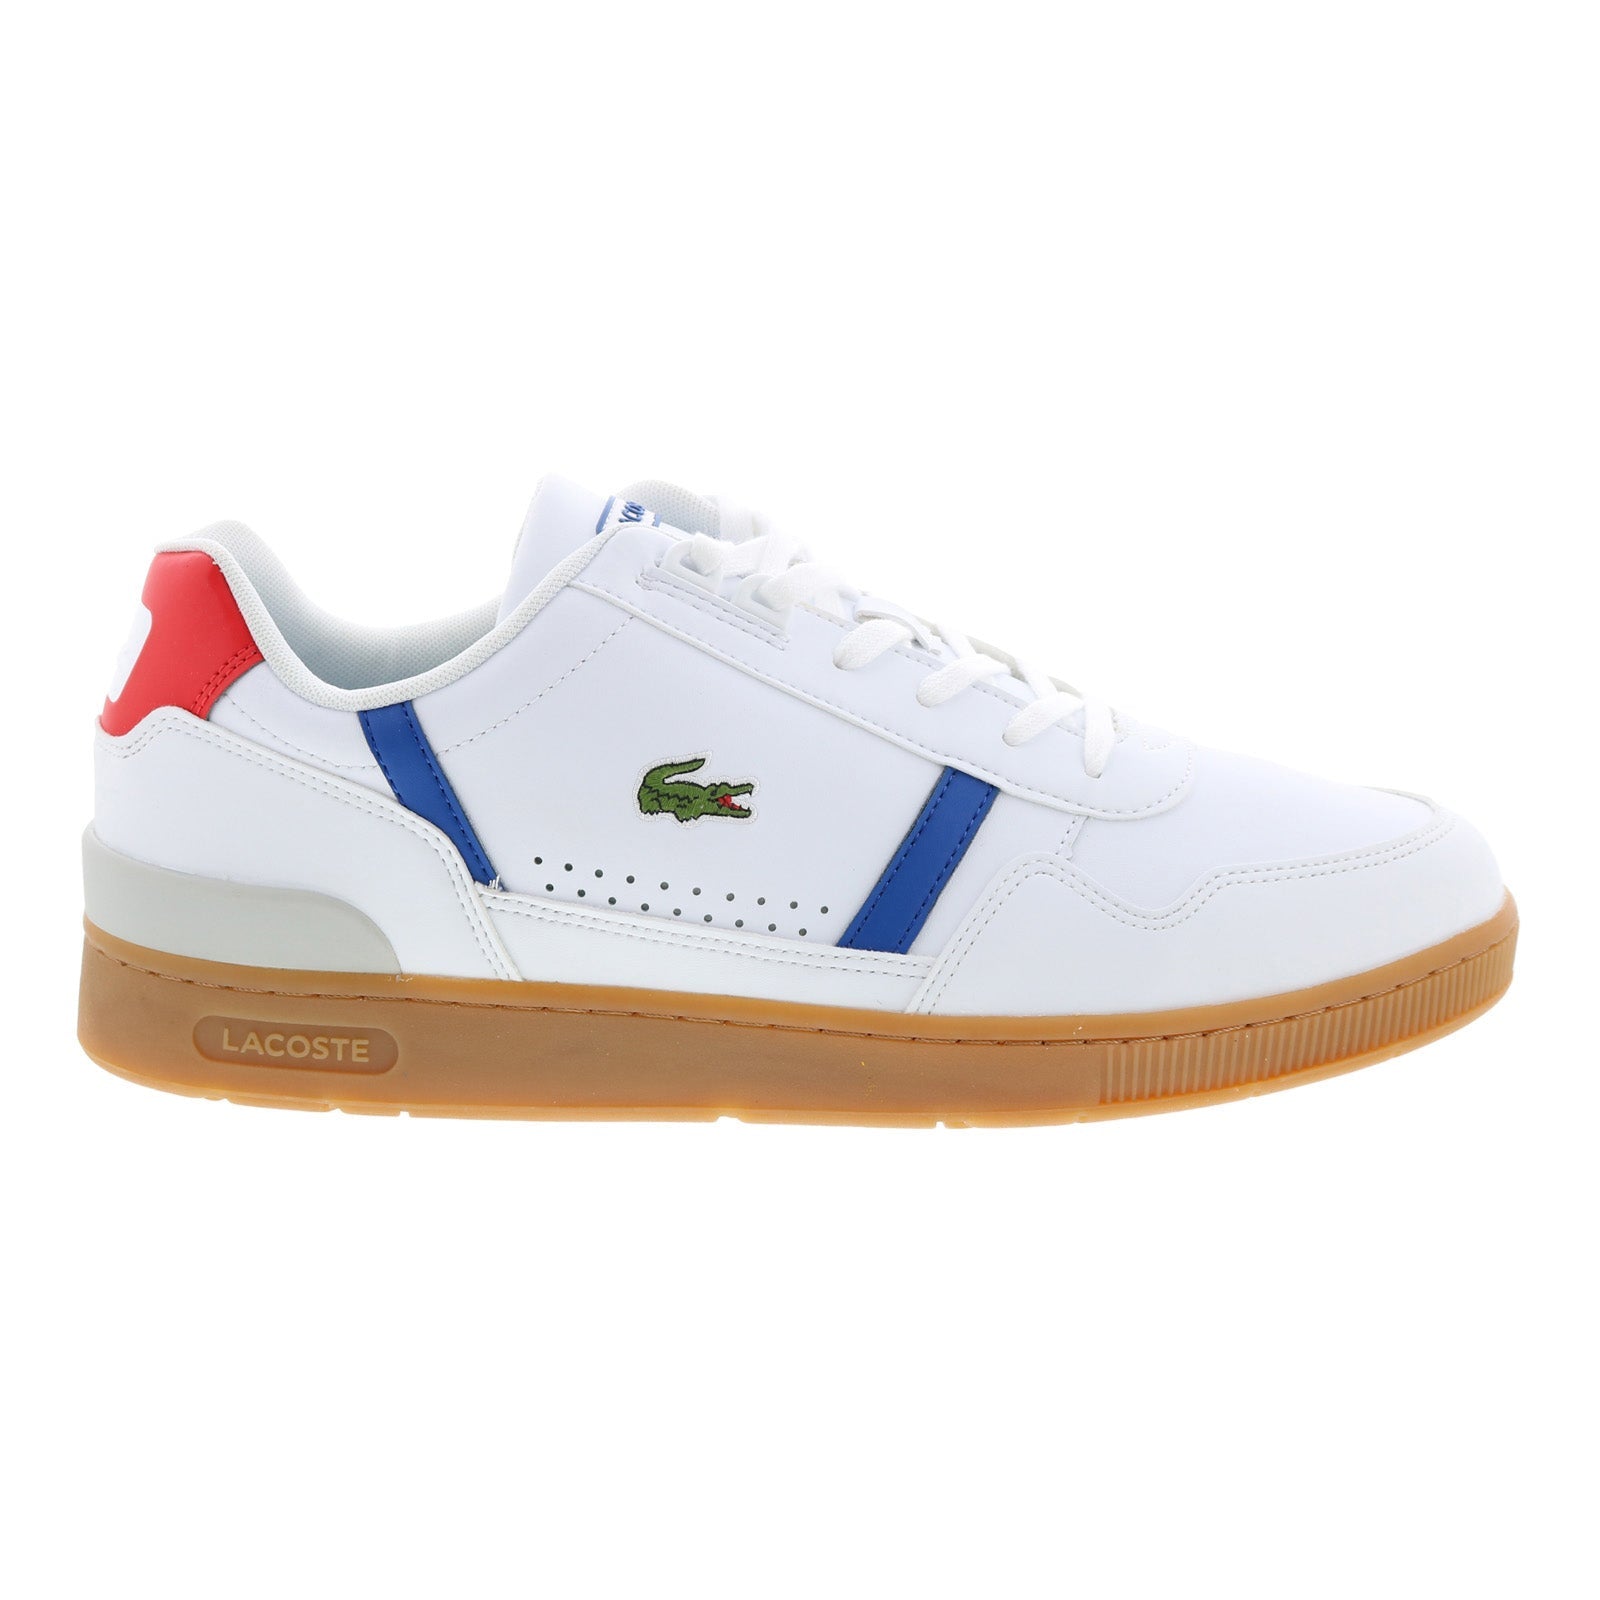 Klooster Koel grijs Lacoste T-Clip 222 1 7-44SMA0031Y37 Mens White Lifestyle Sneakers Shoe -  Ruze Shoes